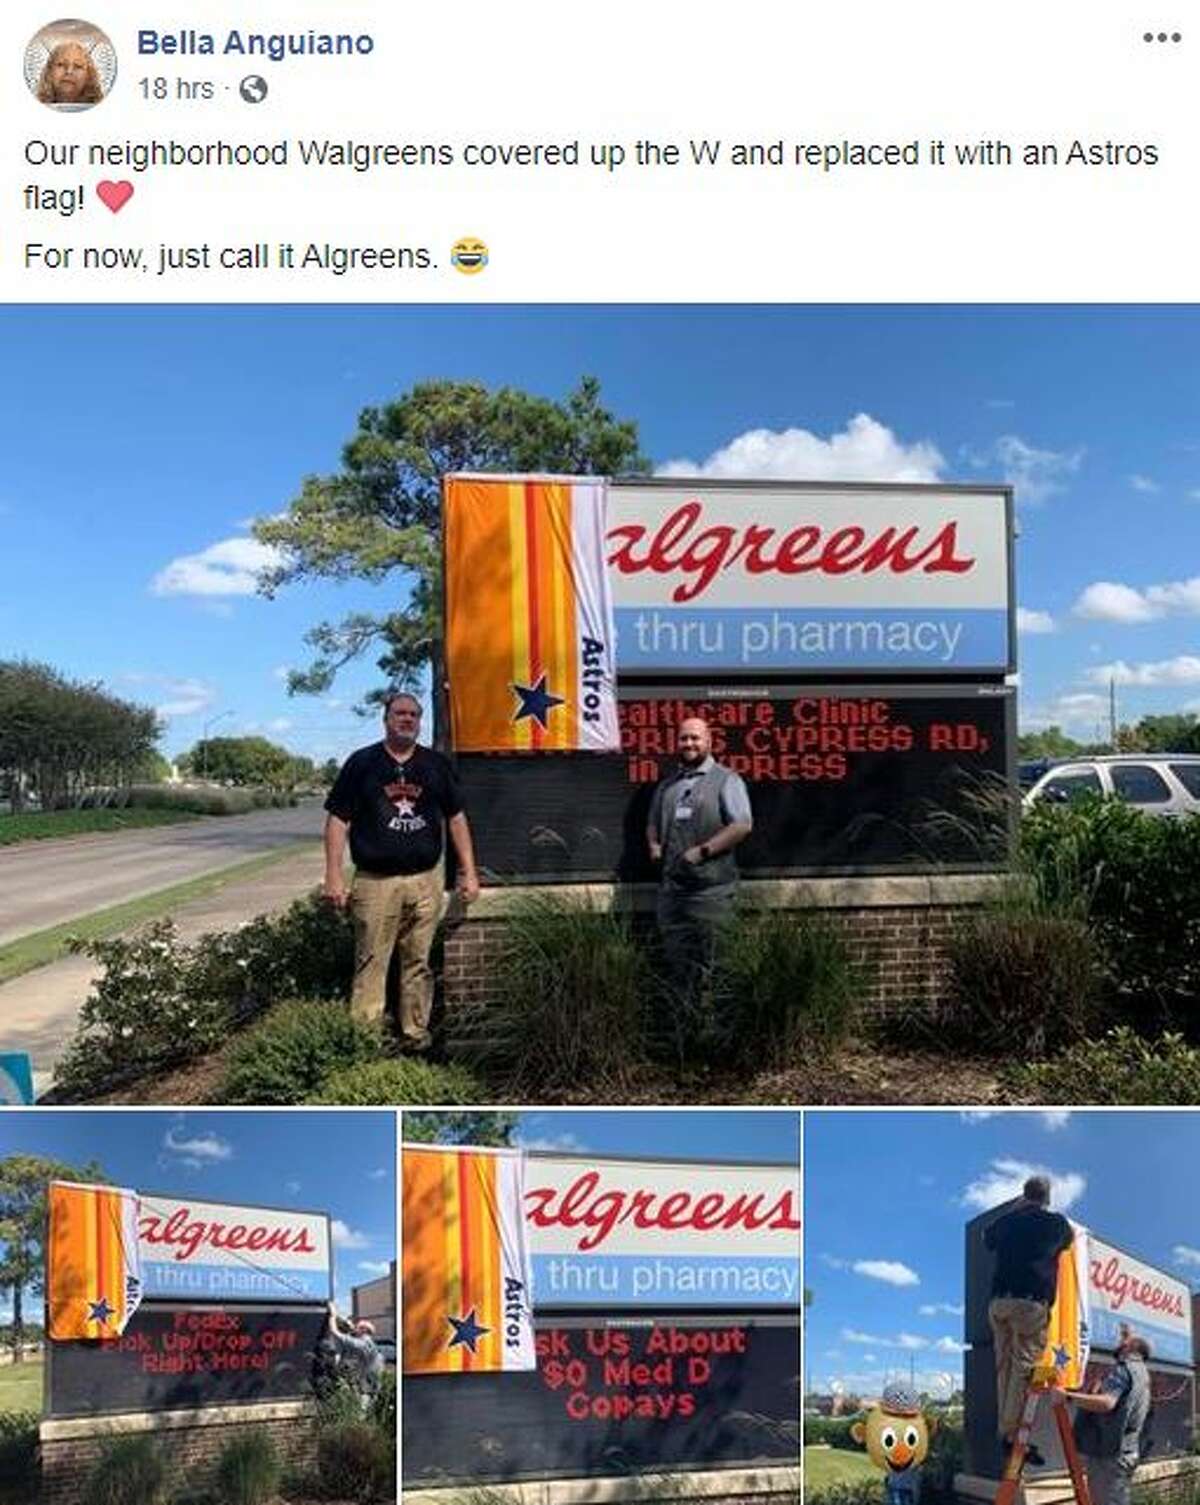 Gotta Believe!' Cypress Walgreens owner covers up 'W' with Astros flag